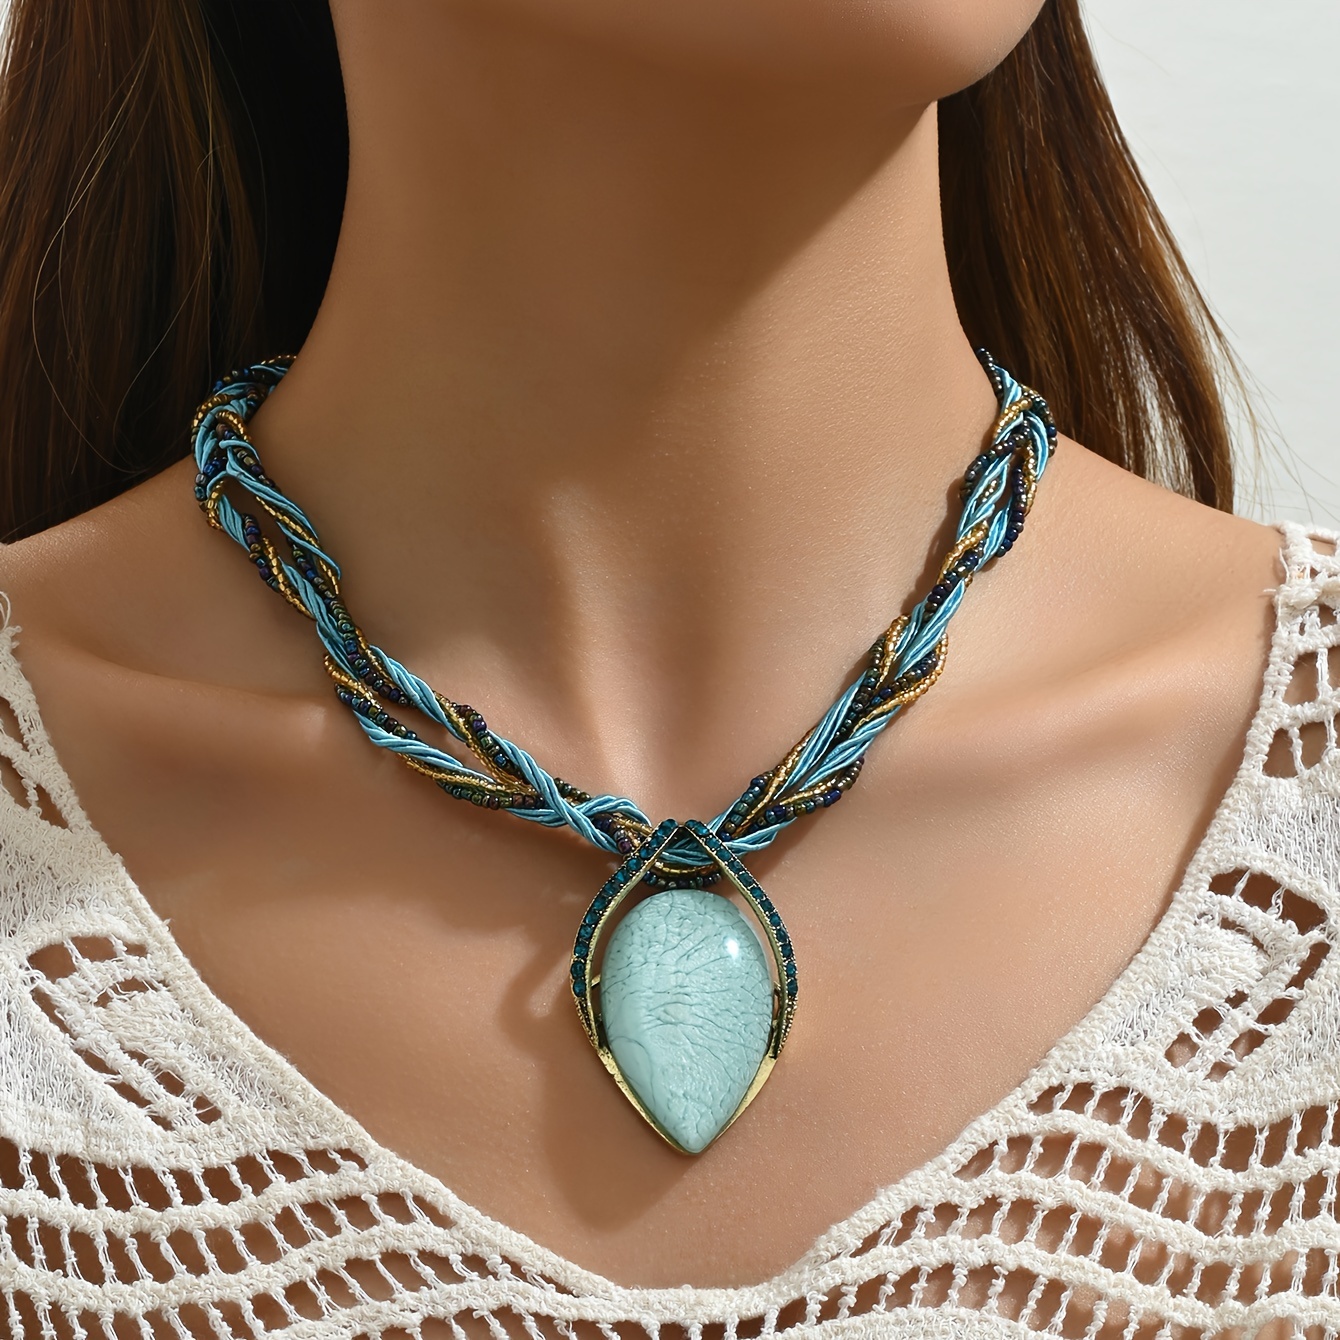 

Bohemian Vintage Style Teardrop Cat Eye Stone Pendant Necklace, Ethnic Sweater Chain Jewelry With Multicolor Rope Accents